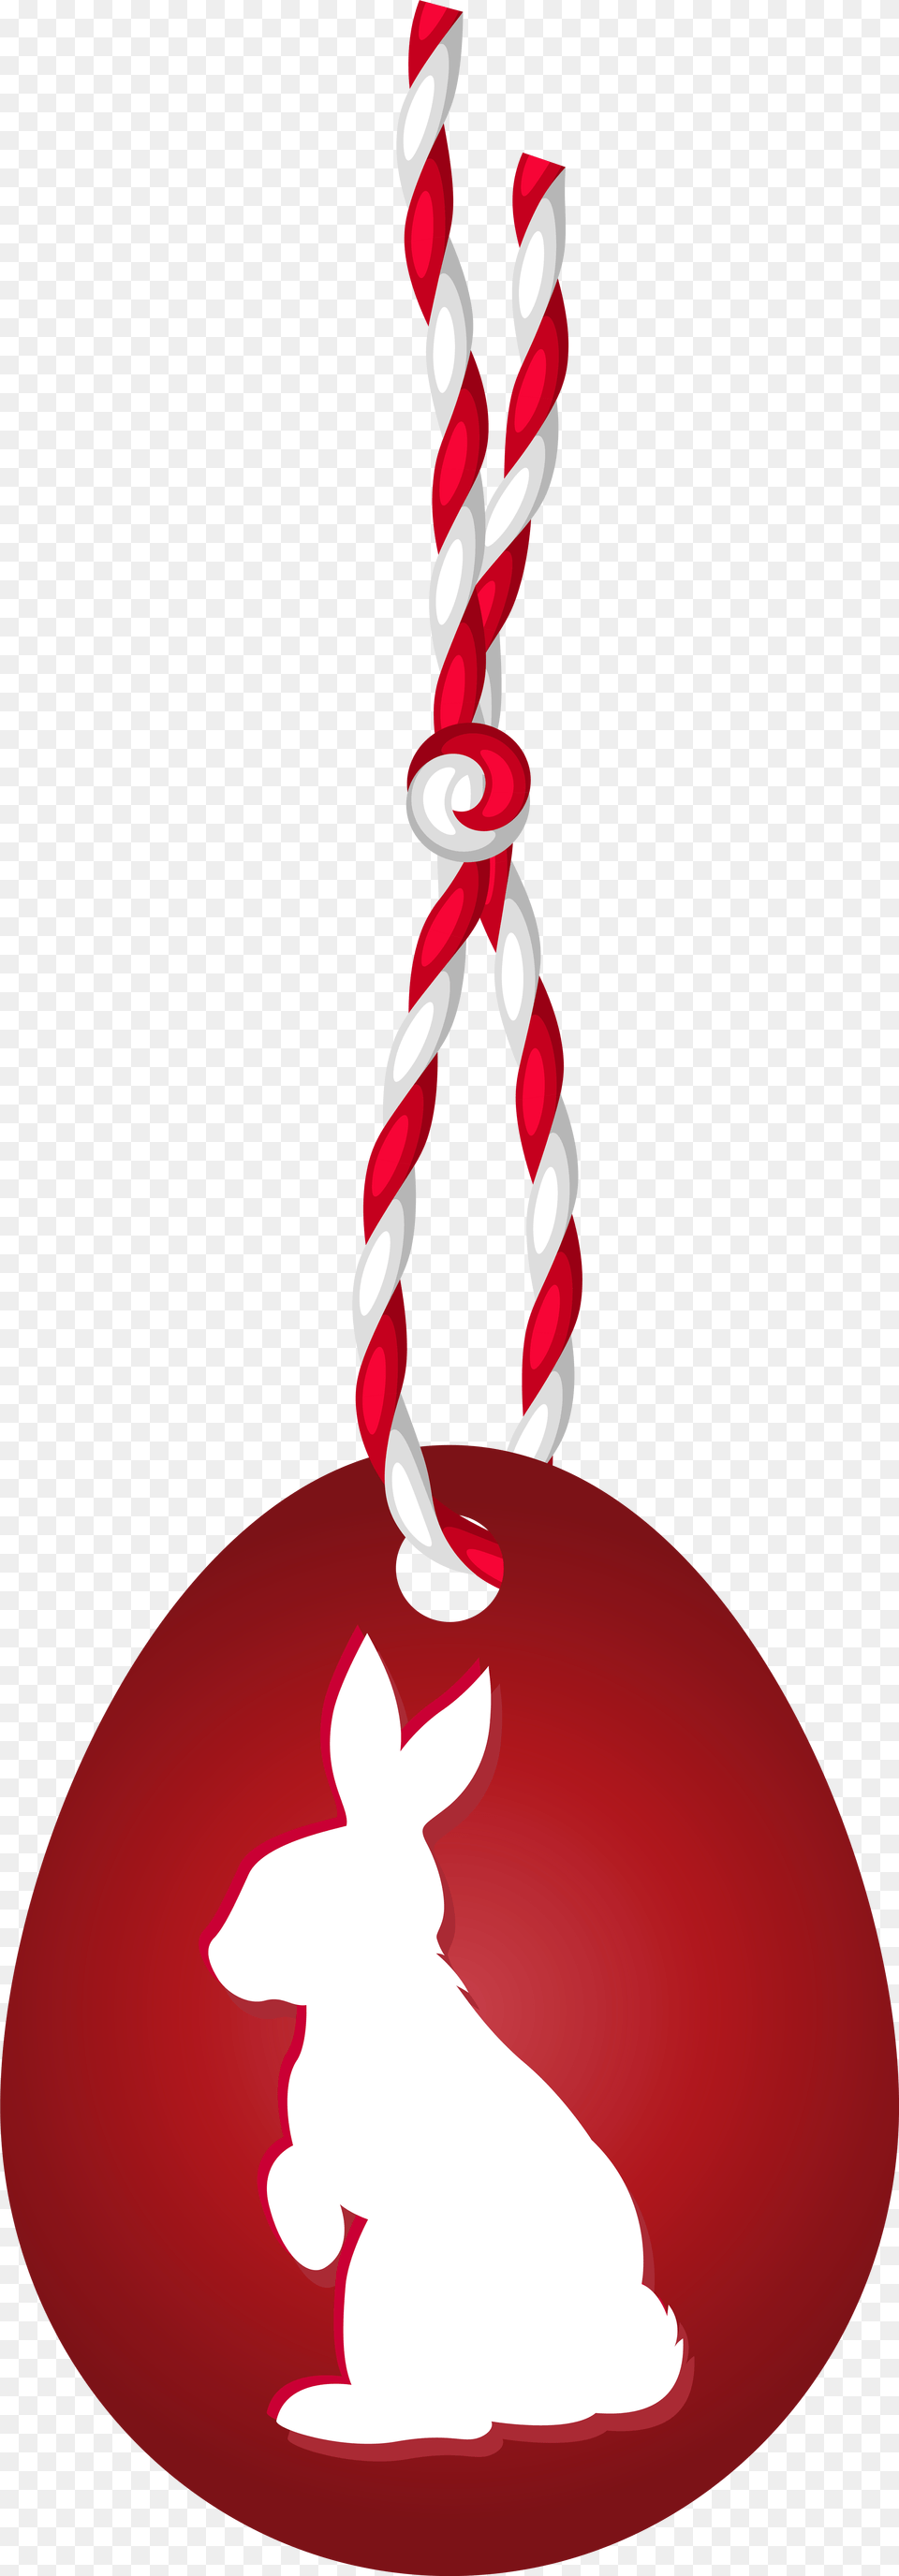 Red Easter Hanging Egg With Bunny Clip Art, Accessories, Lighting, Dynamite, Weapon Png